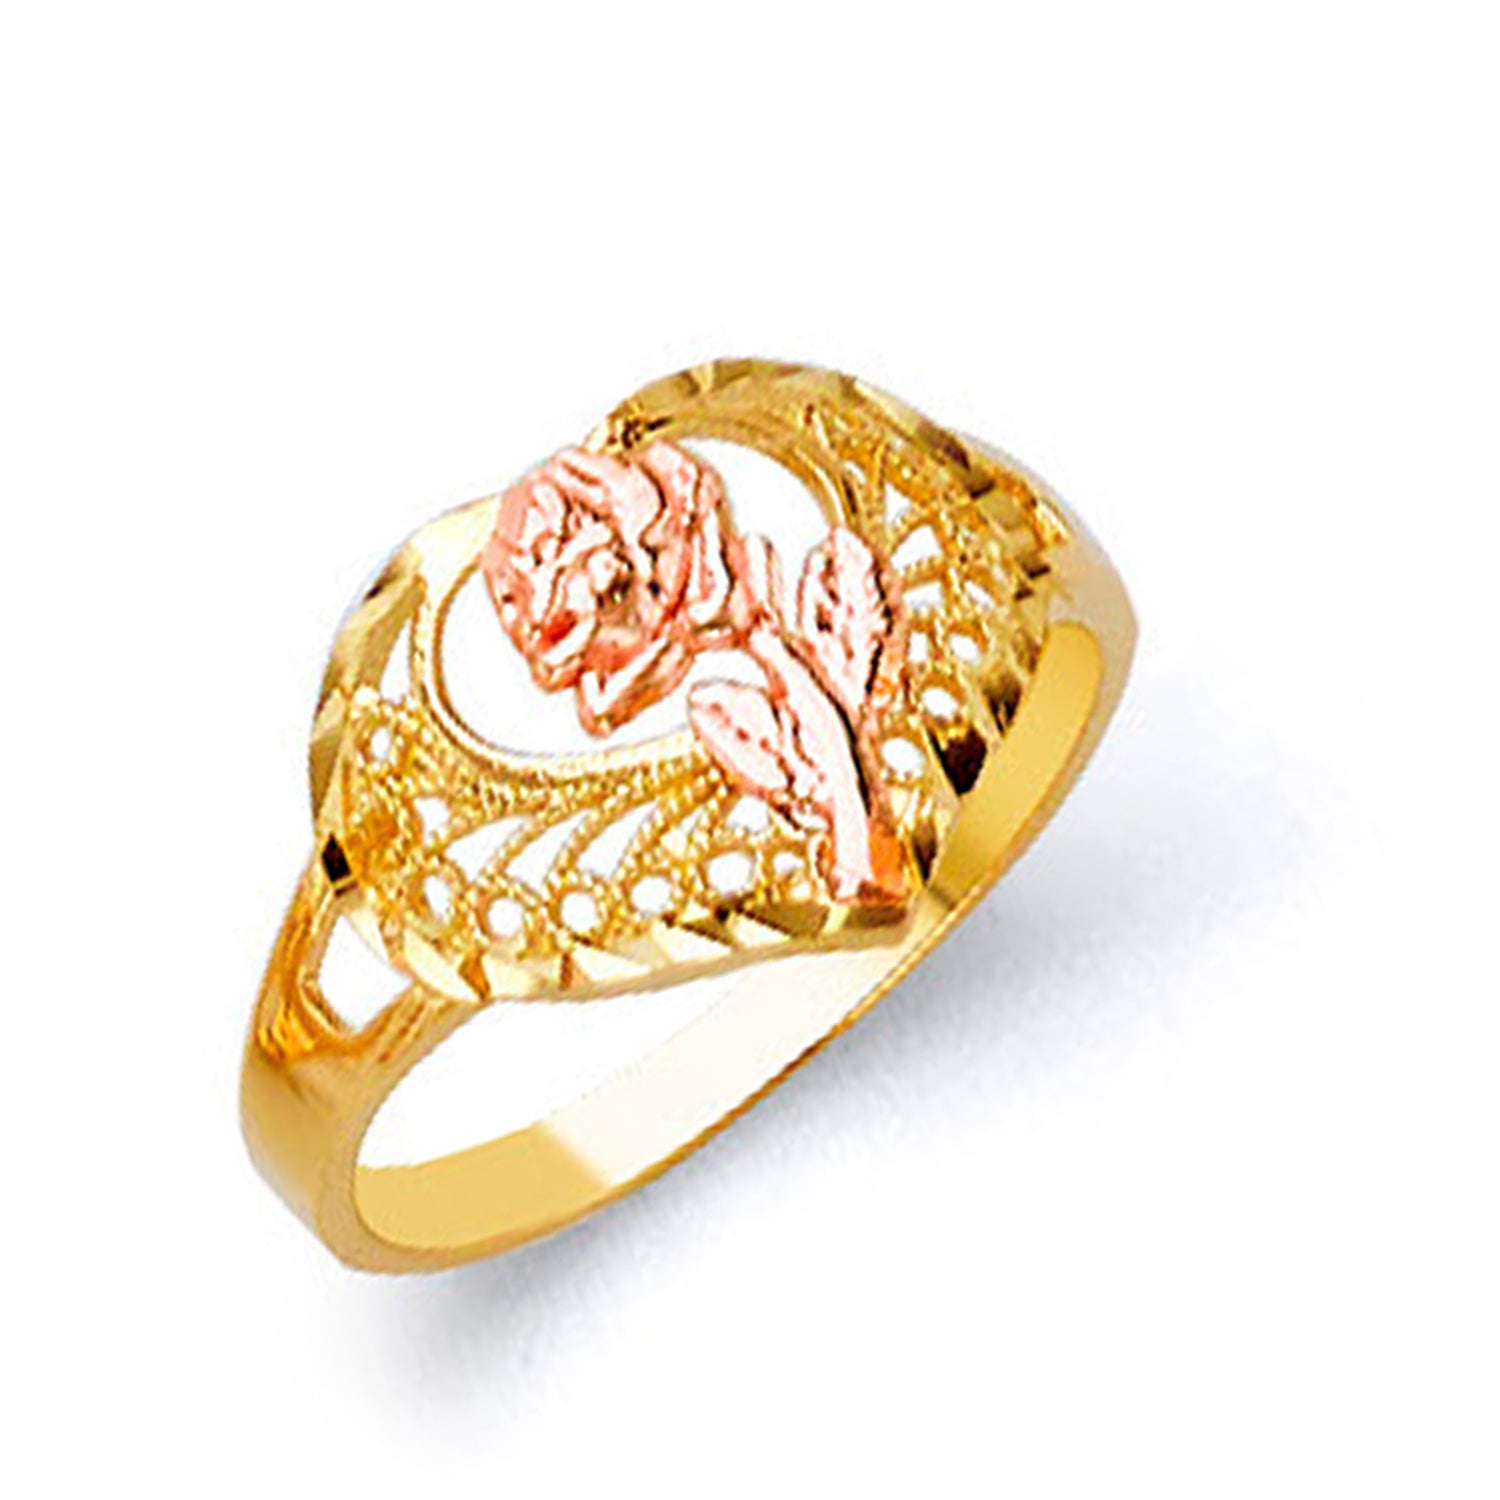 Rose-casted Heart Ring in Solid Gold 